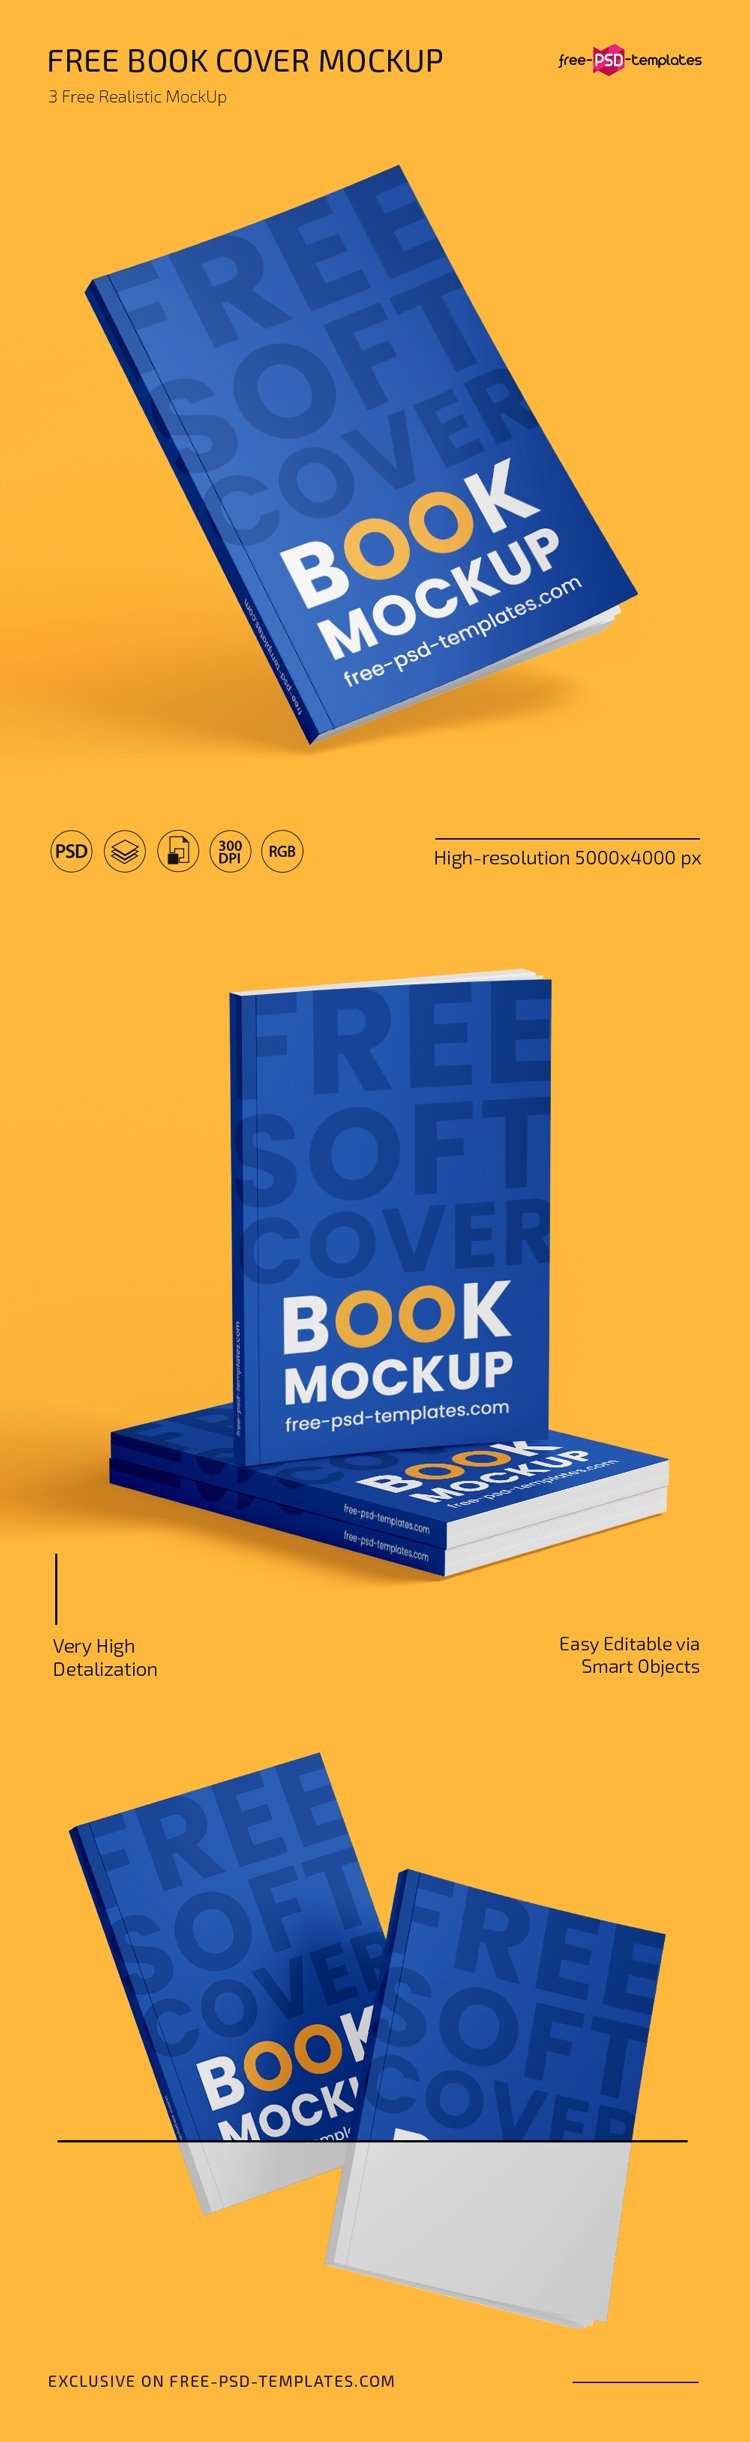 Standing Softcover Book Mockup Free Download